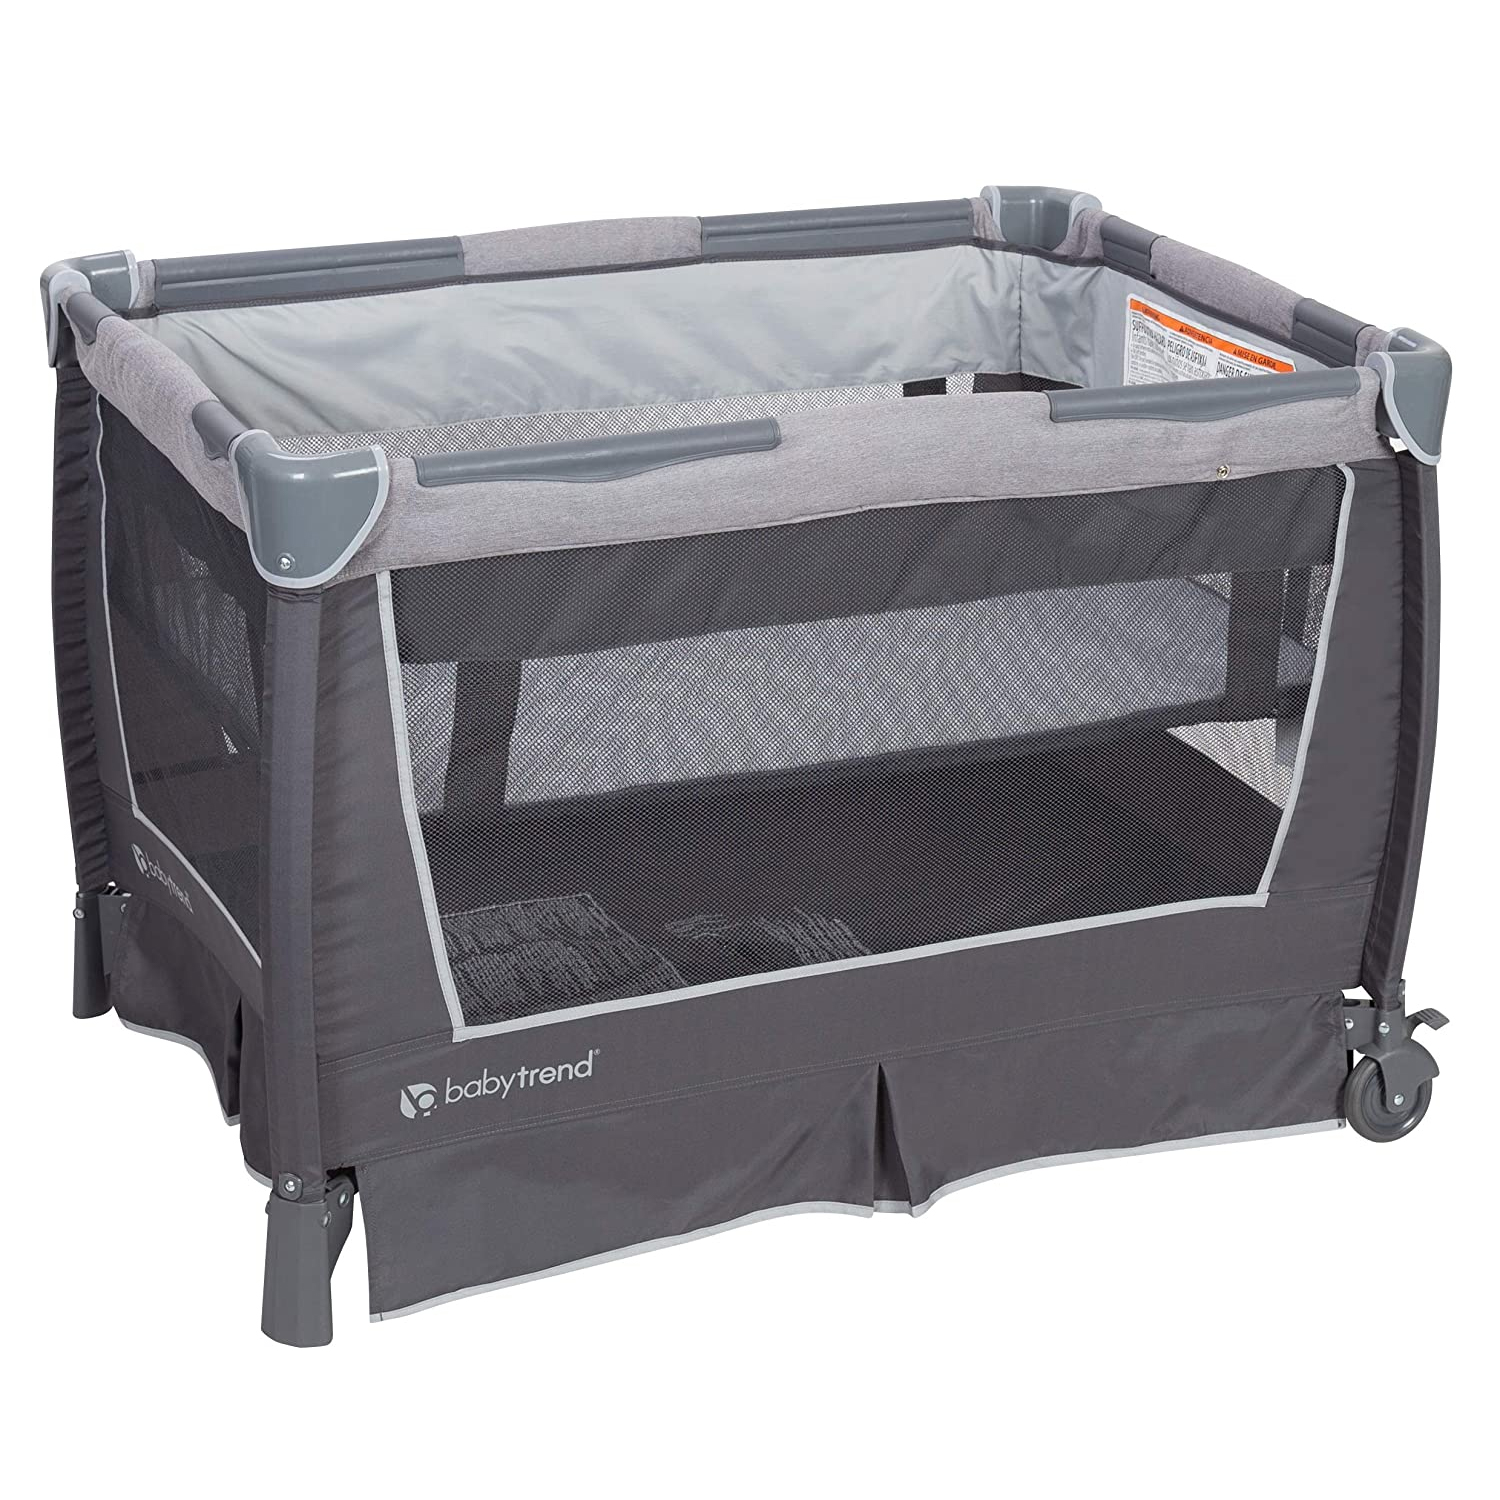 Baby Trend Retreat Nursery Center Playard with Bassinet and Travel Bag - Robin Gray - Gray - image 4 of 11